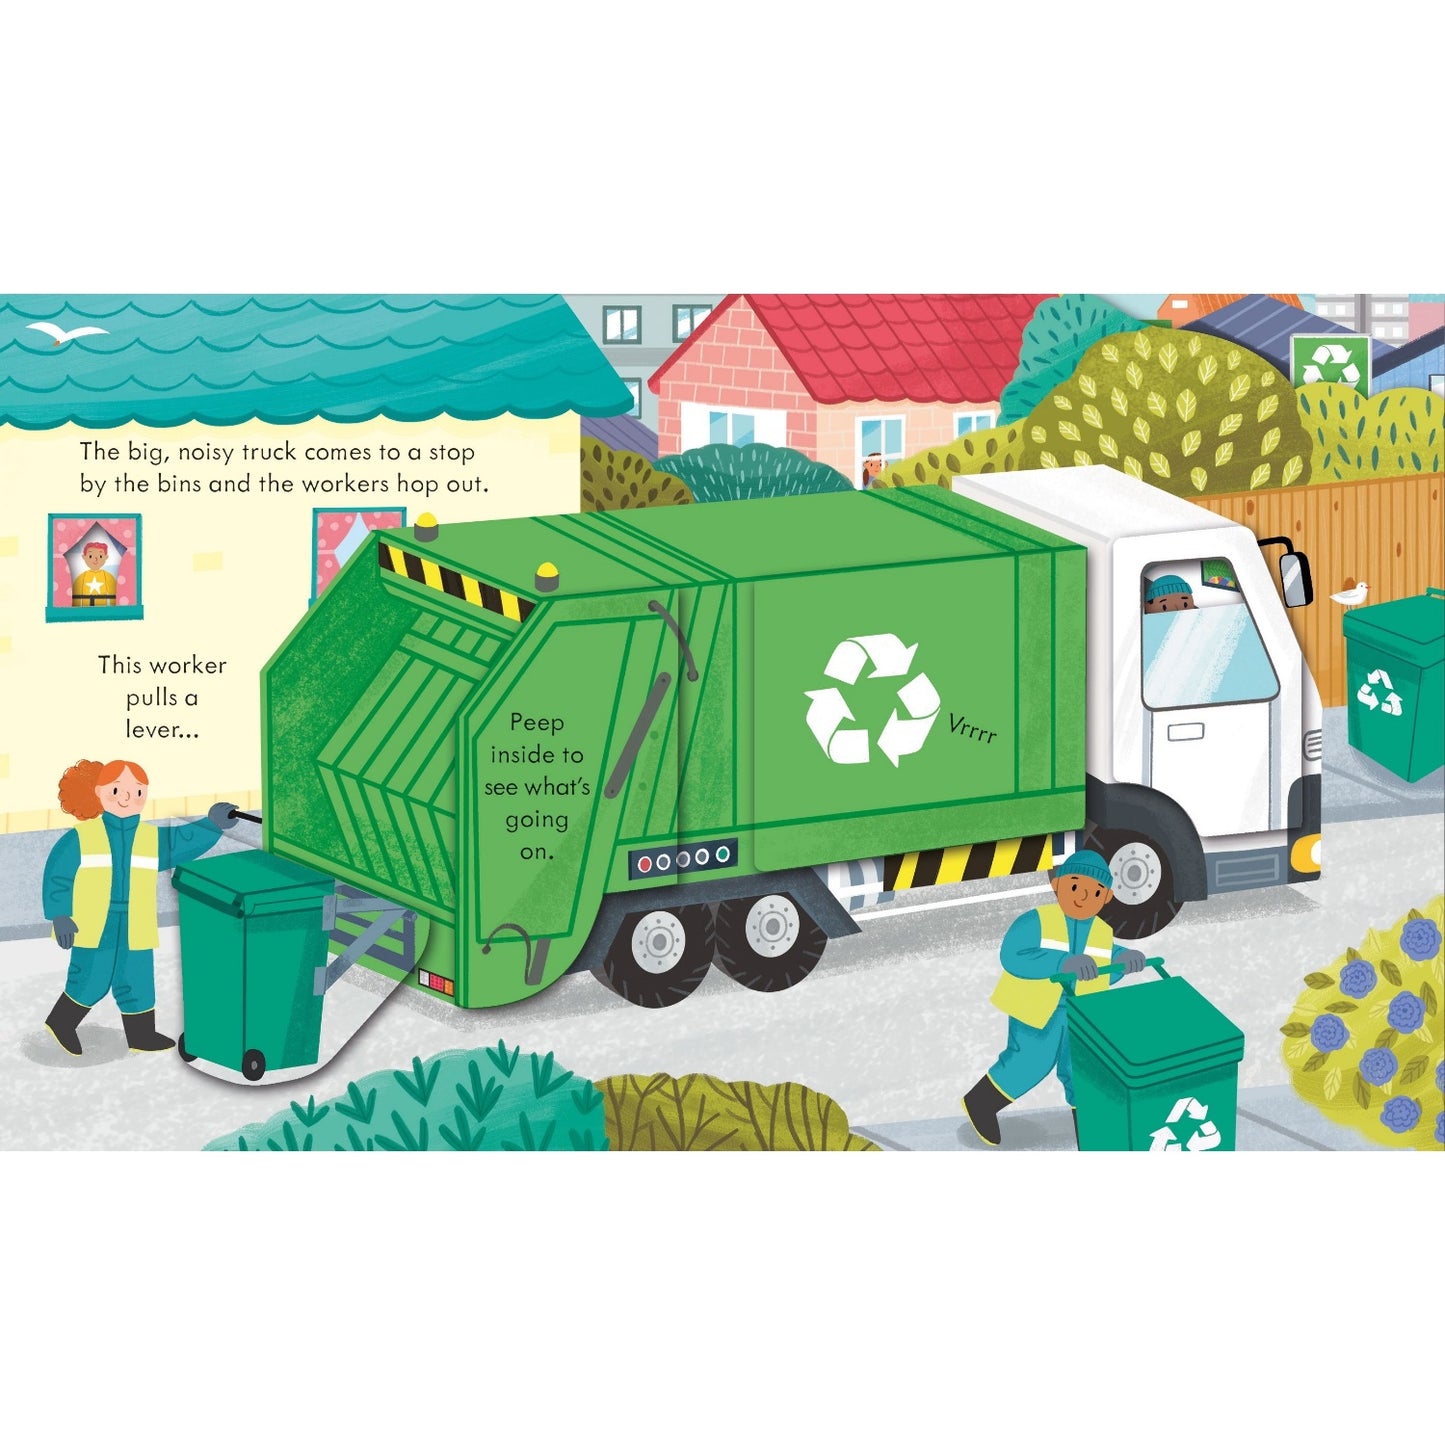 Peep Inside How A Recycling Truck Works | Children's Book on Recycling & Green Living